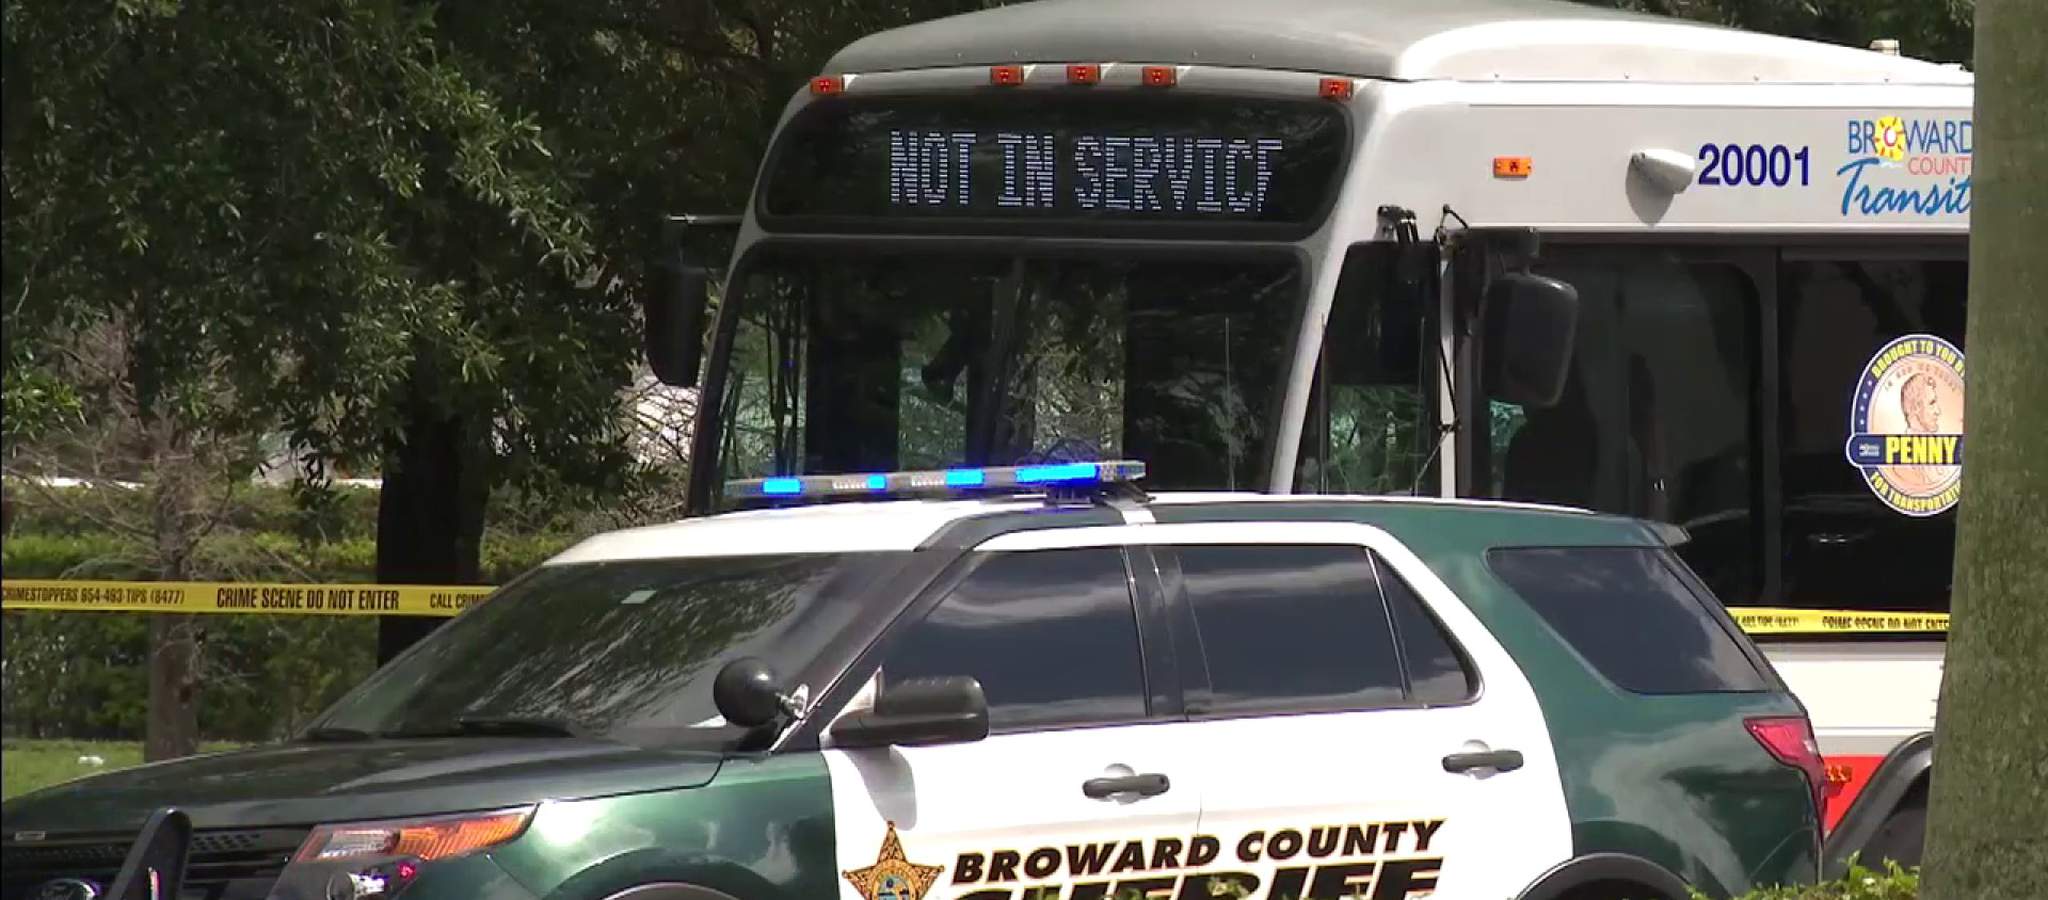 Deputies release identity of man killed on Broward County Transit bus as search for shooter continues